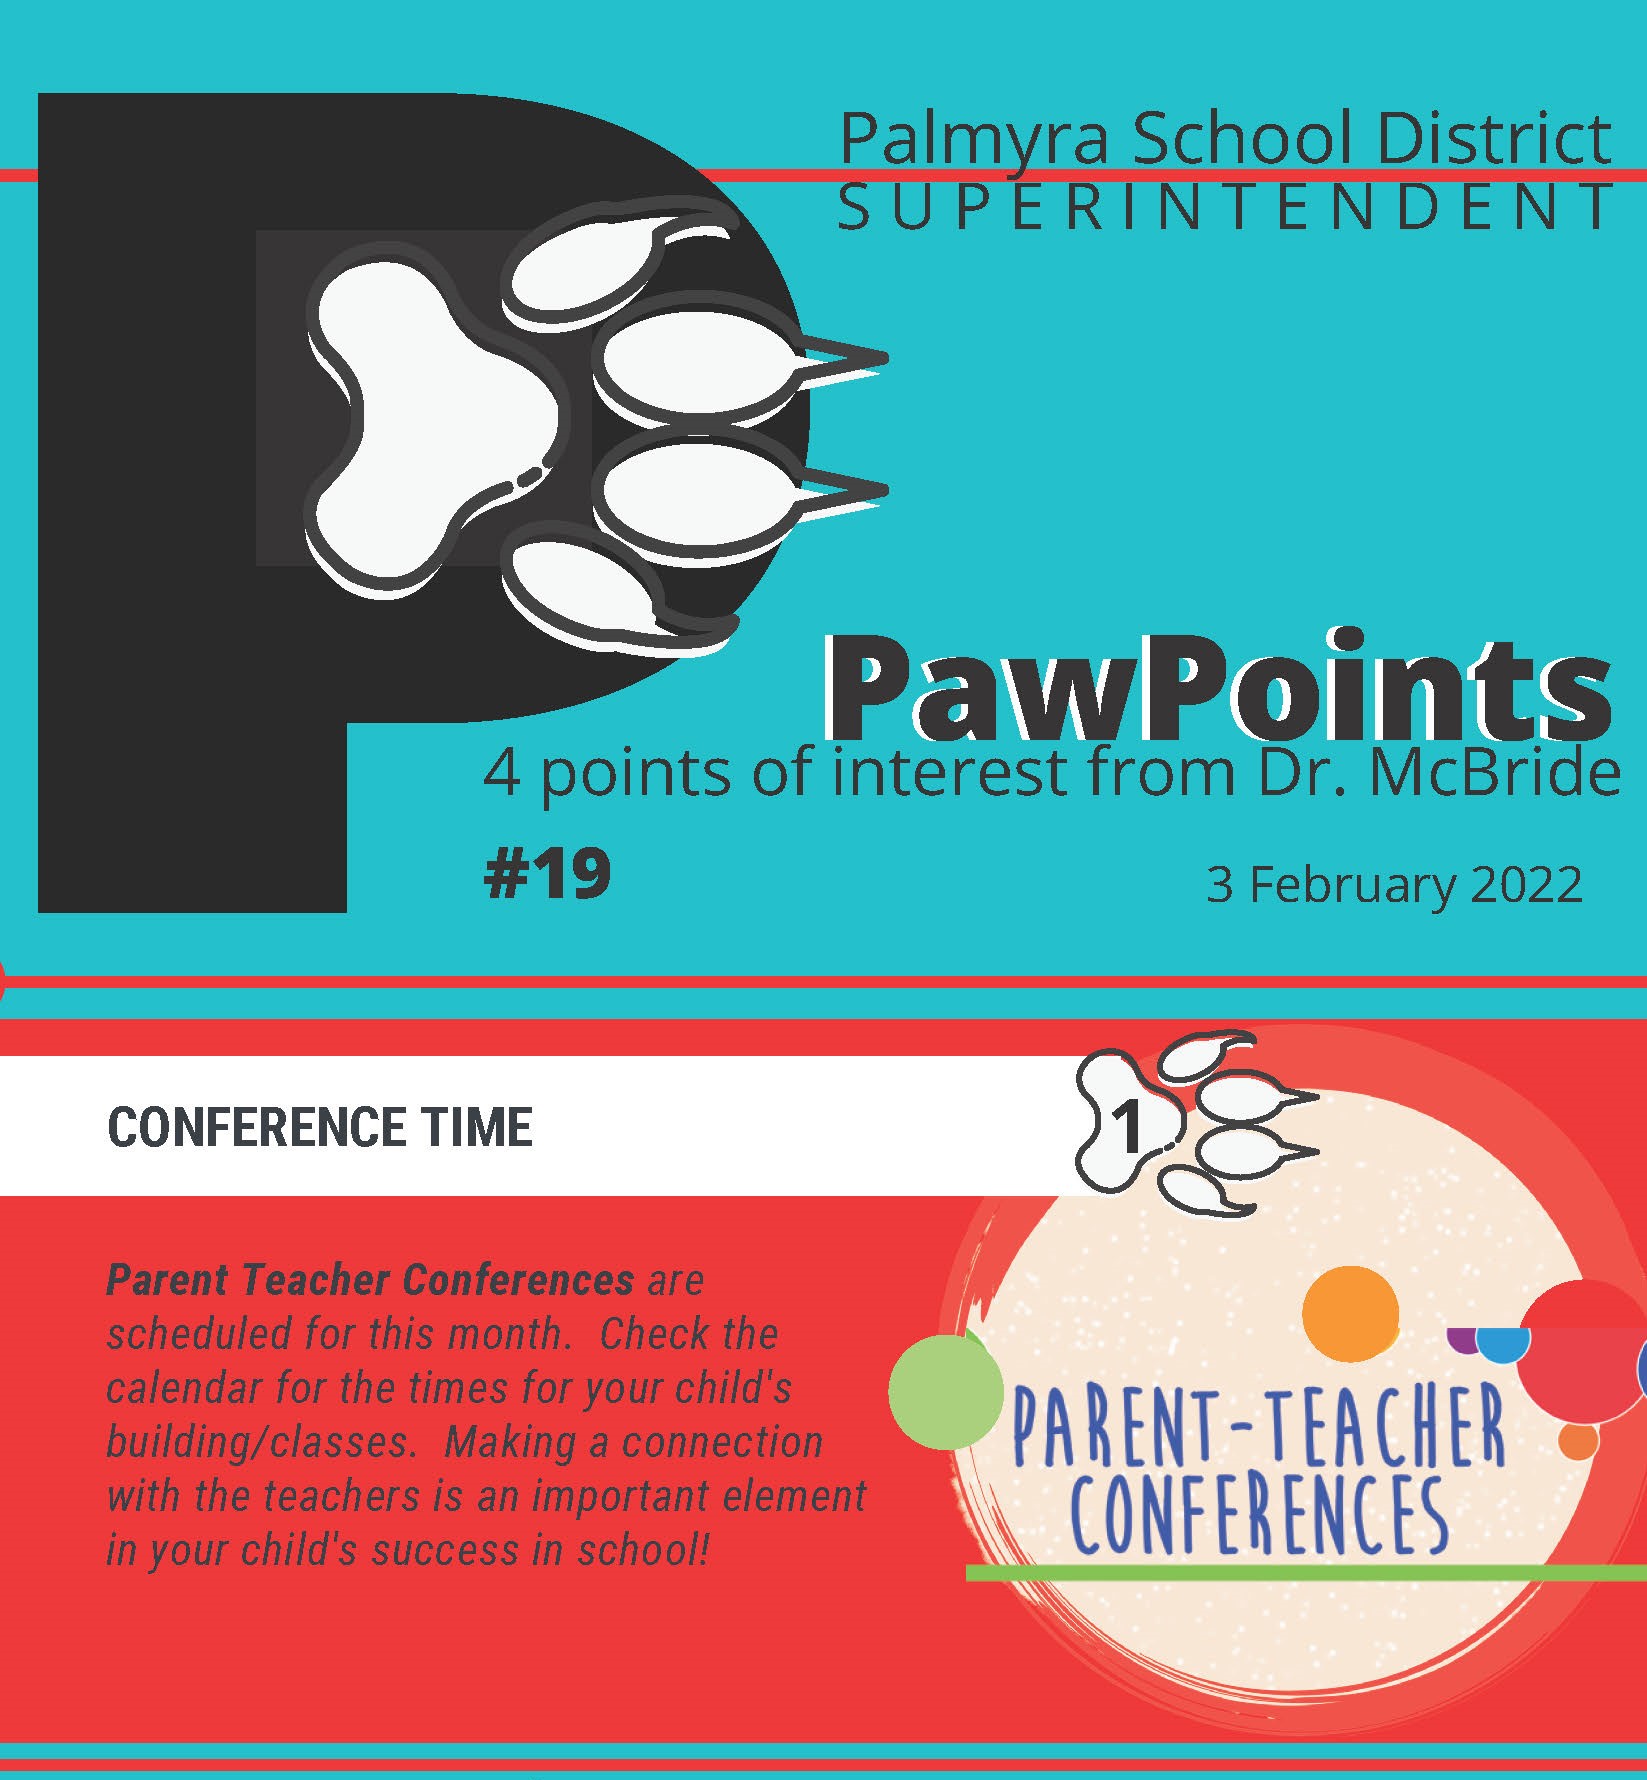 PawPoints conference time